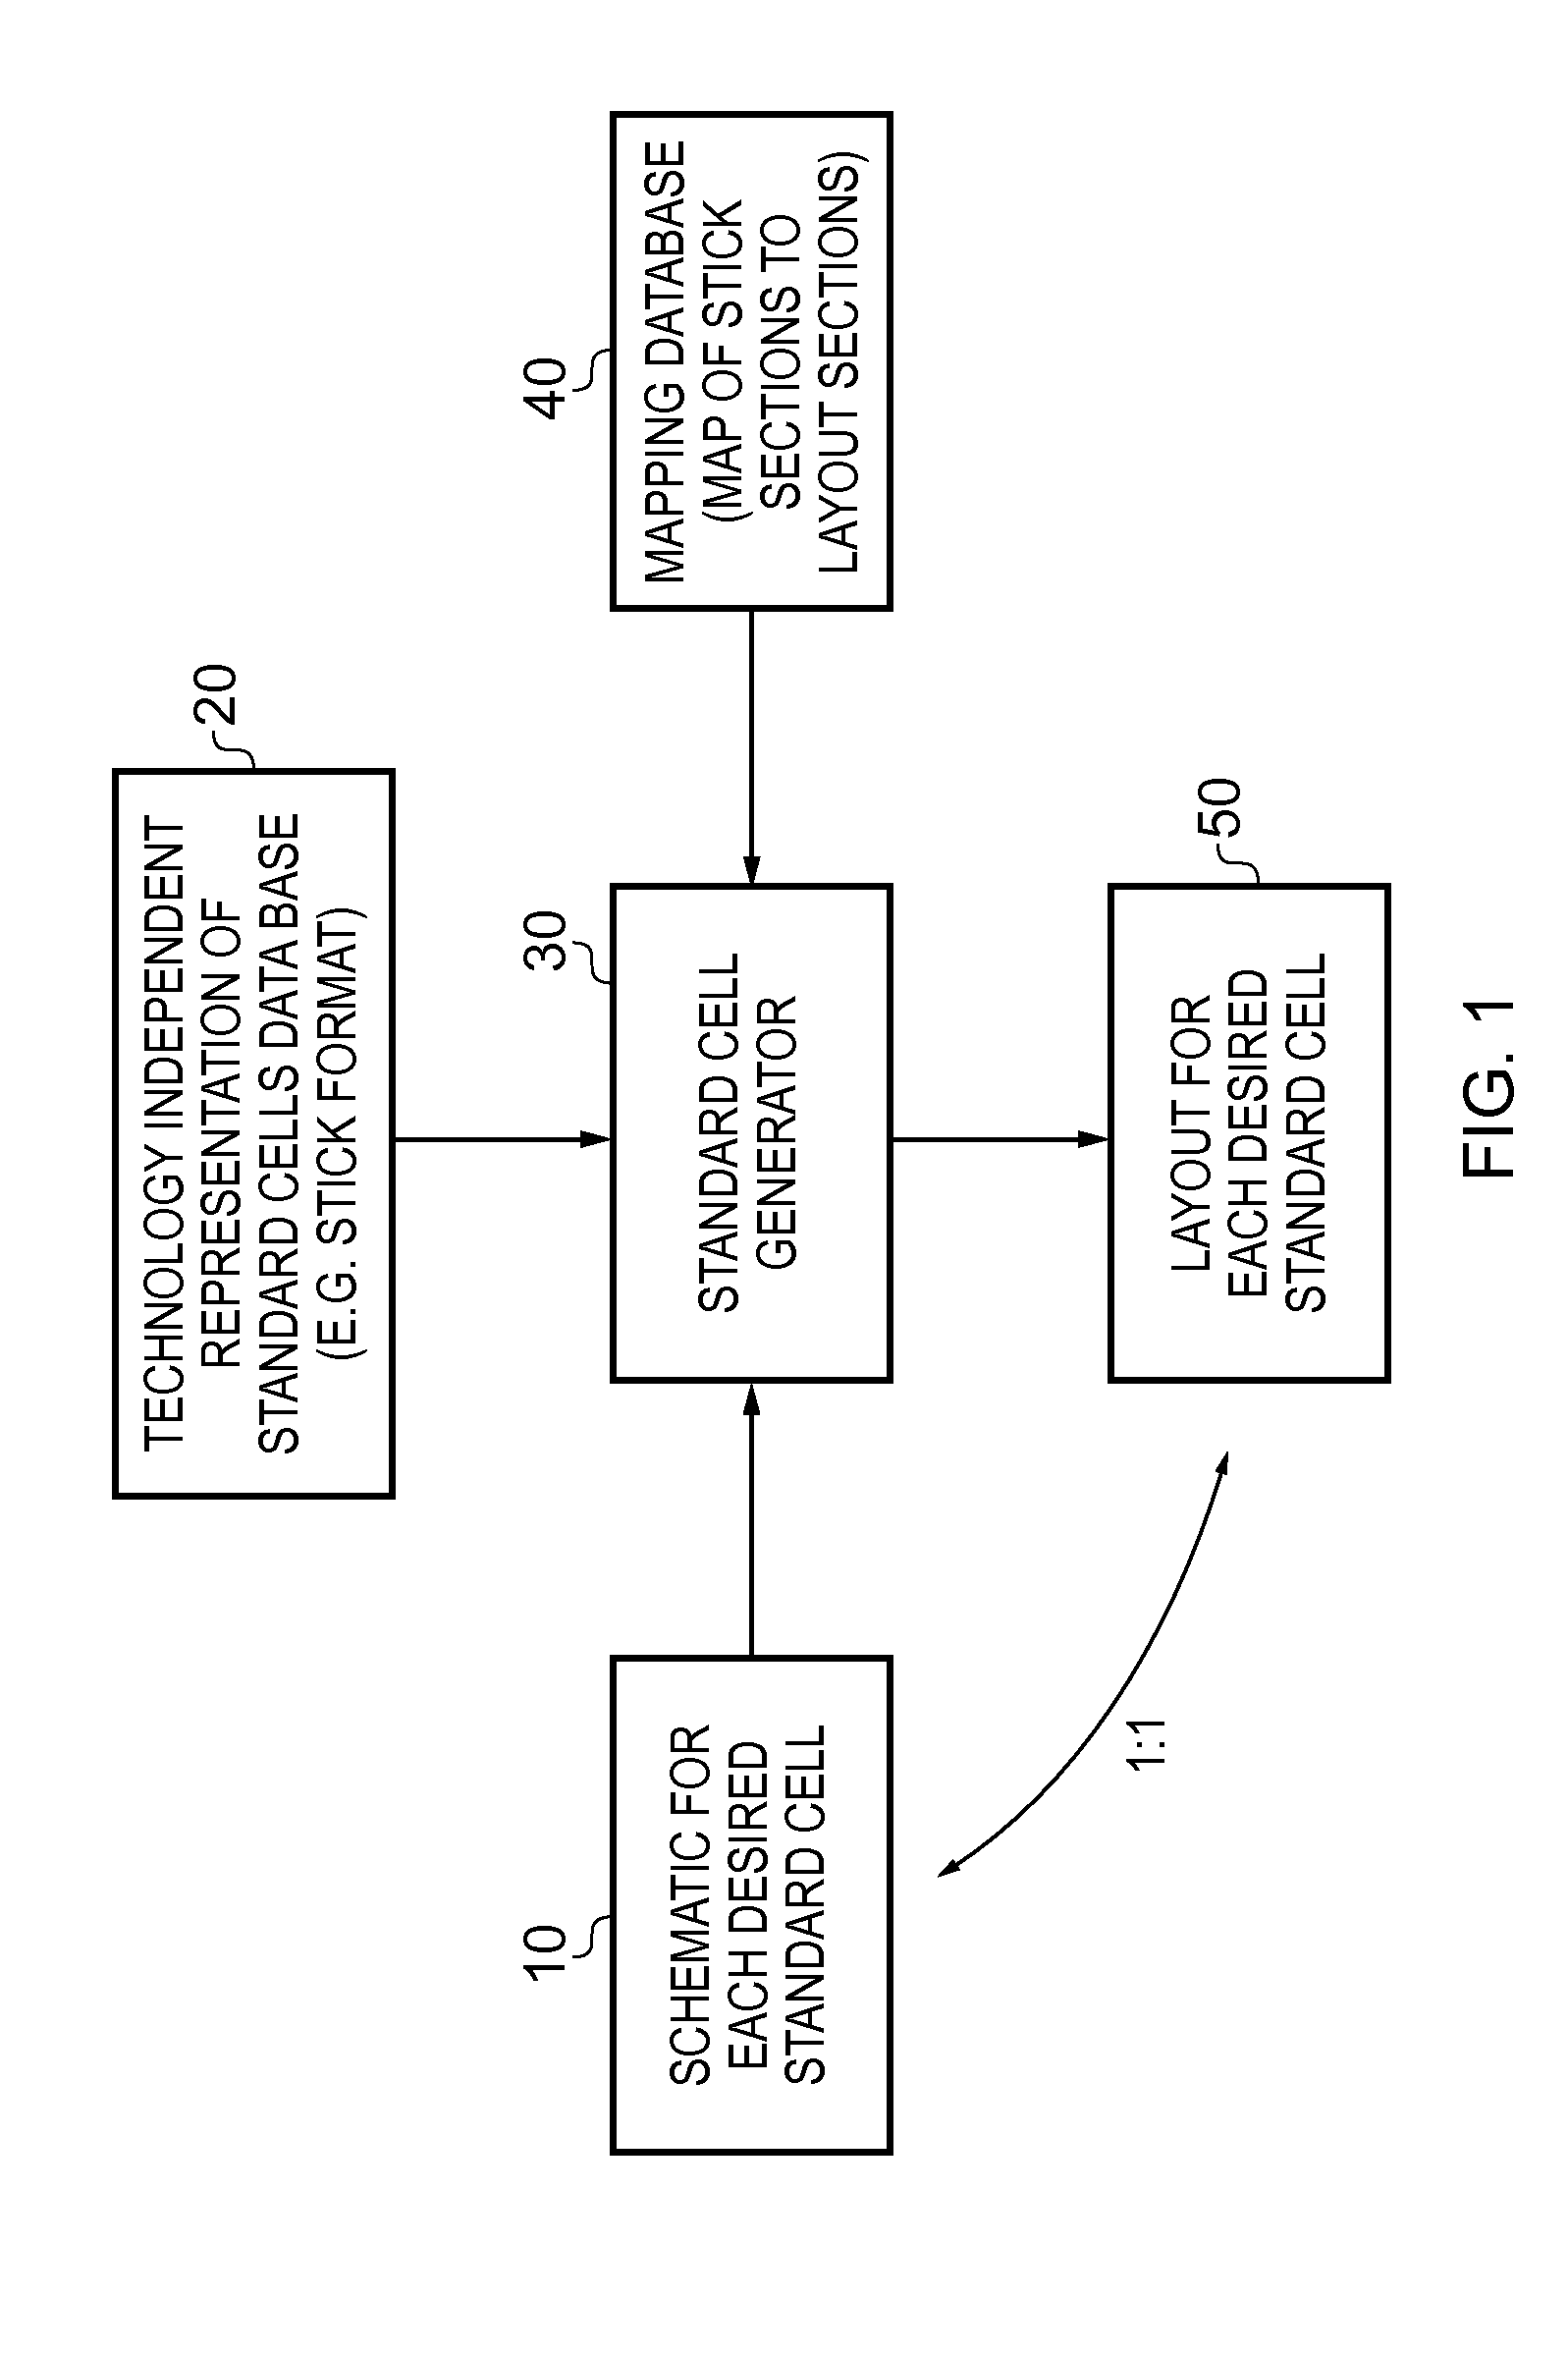 Computer implemented system and method for generating a layout of a cell defining a circuit component